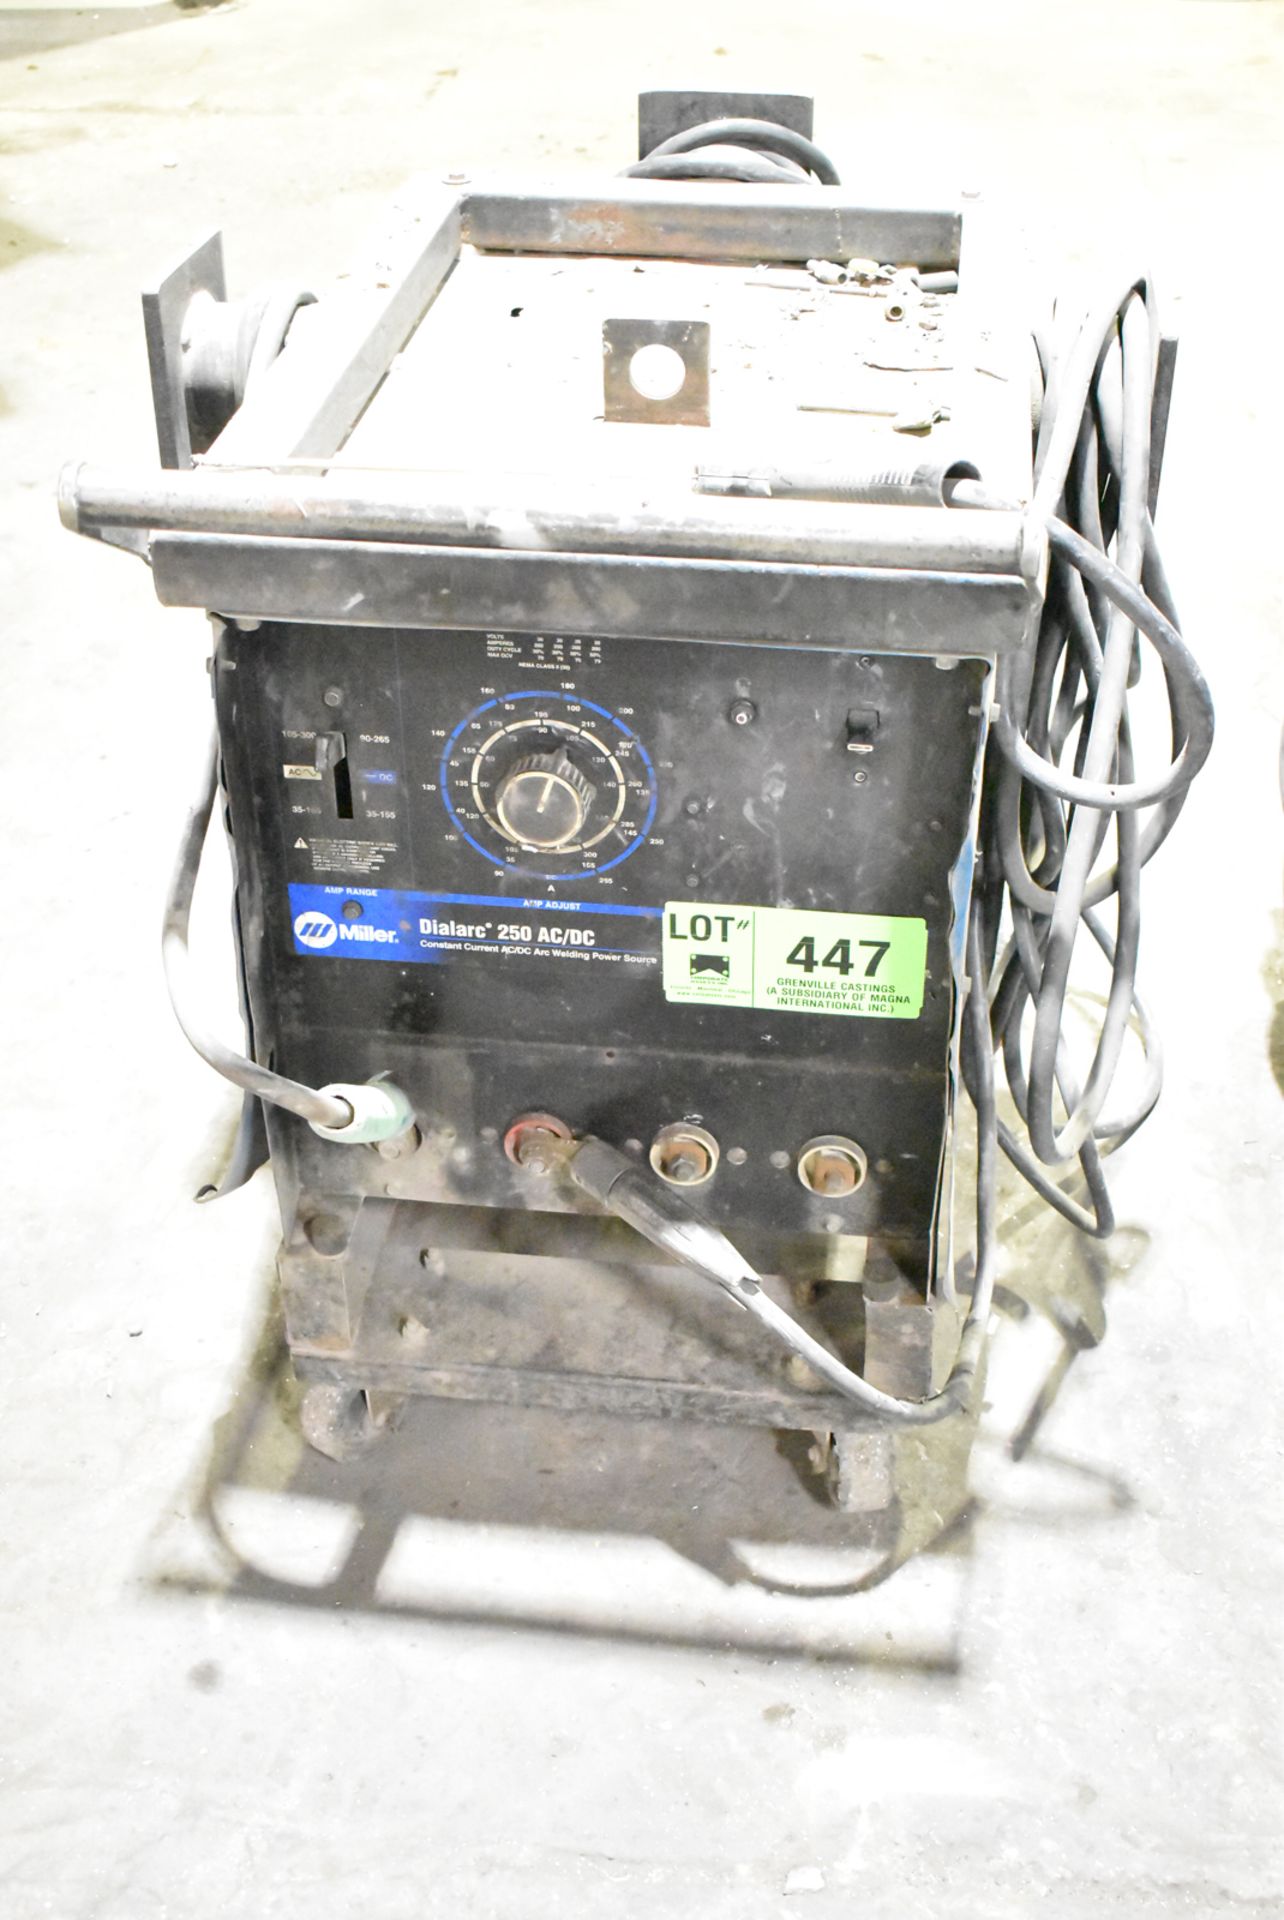 MILLER DIALARC 250 AC/DC ARC WELDER WITH CABLES & GUN, S/N N/A